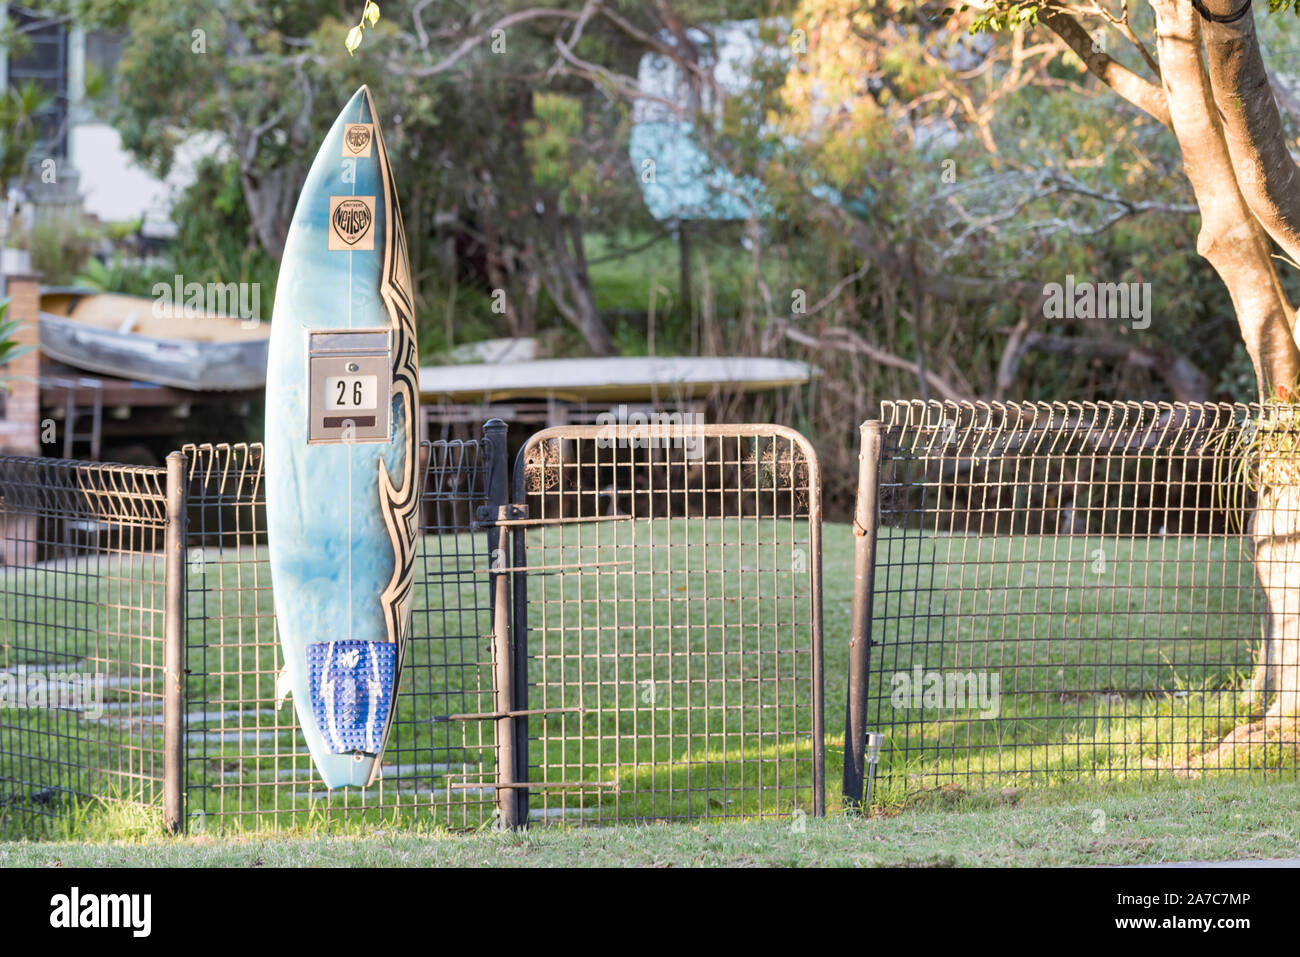 A letterbox fashioned from a converted upcycled surfboard attached to a steel fence in the southern Sydney suburb of Bundeena in Australia Stock Photo